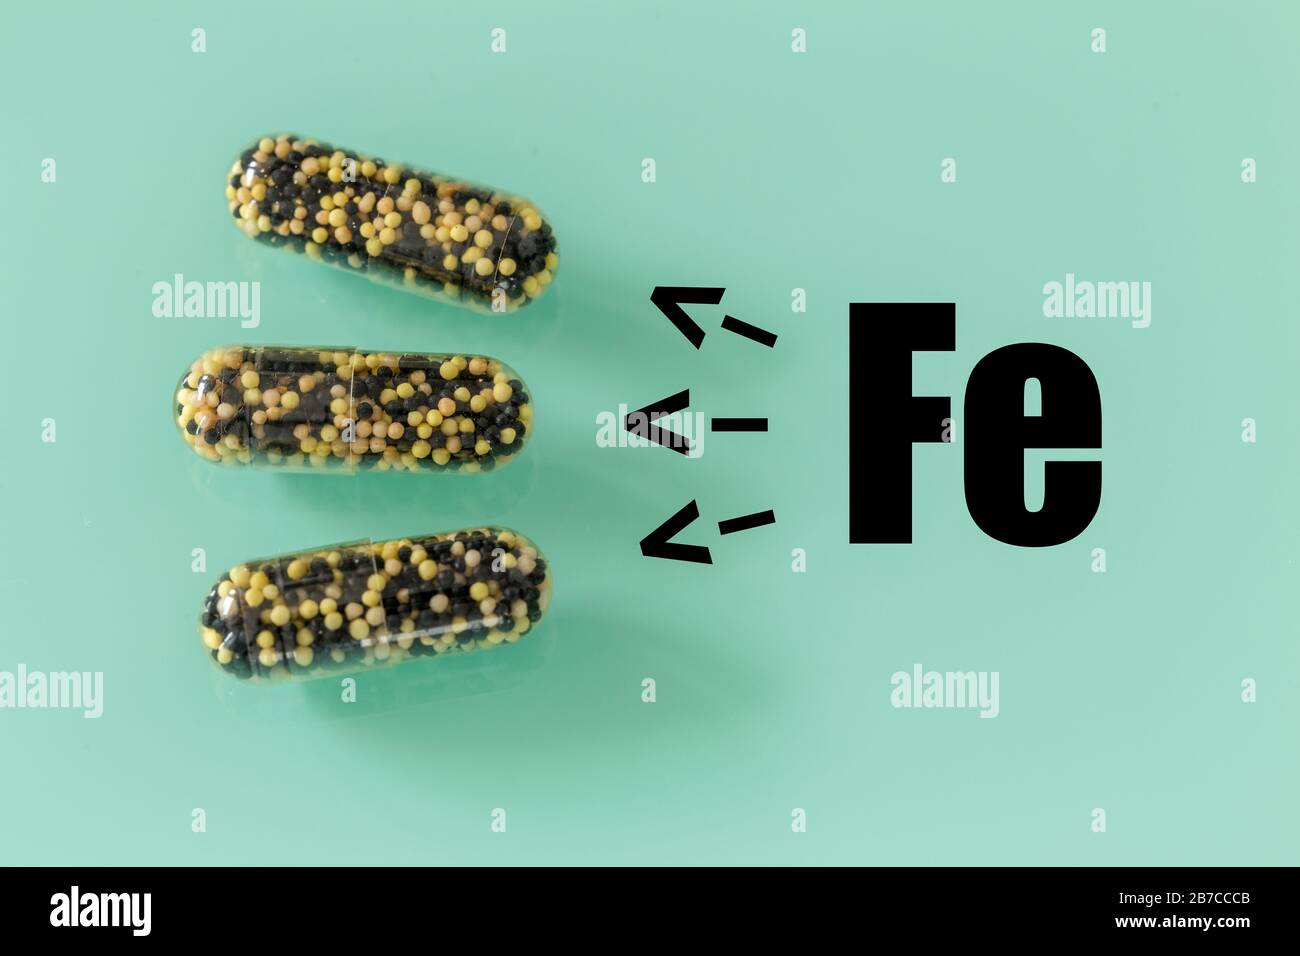 iron pastilles and the chemical symbol name 'Fe' Stock Photo